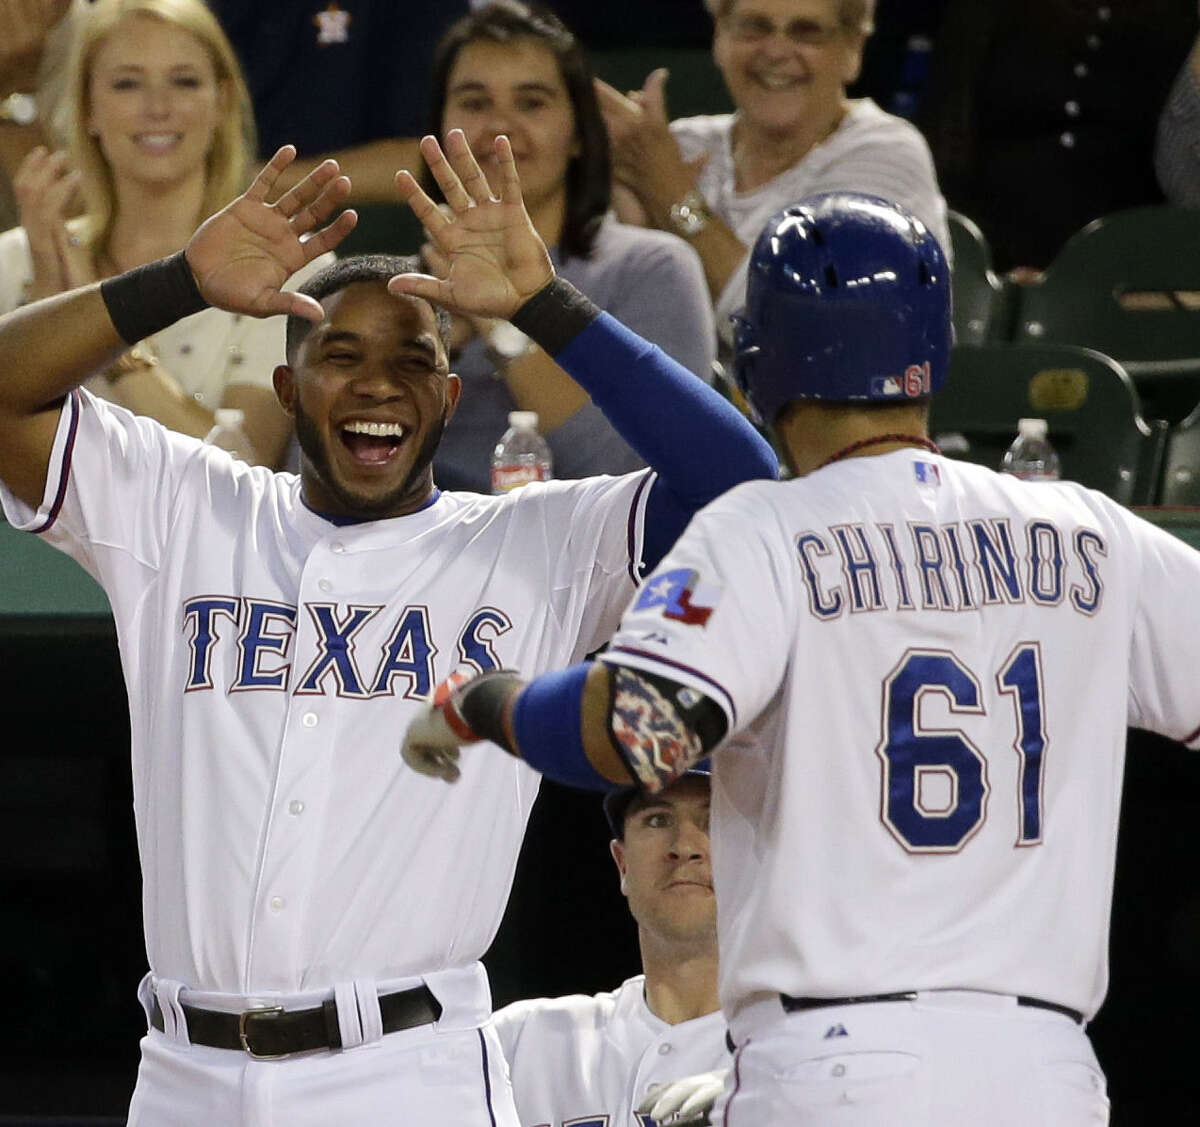 The Rangers' Elvis Andrus waits to greet Robinson Chirinos, who returned to the dugout after hitting a home run in the fourth inning in Arlington.